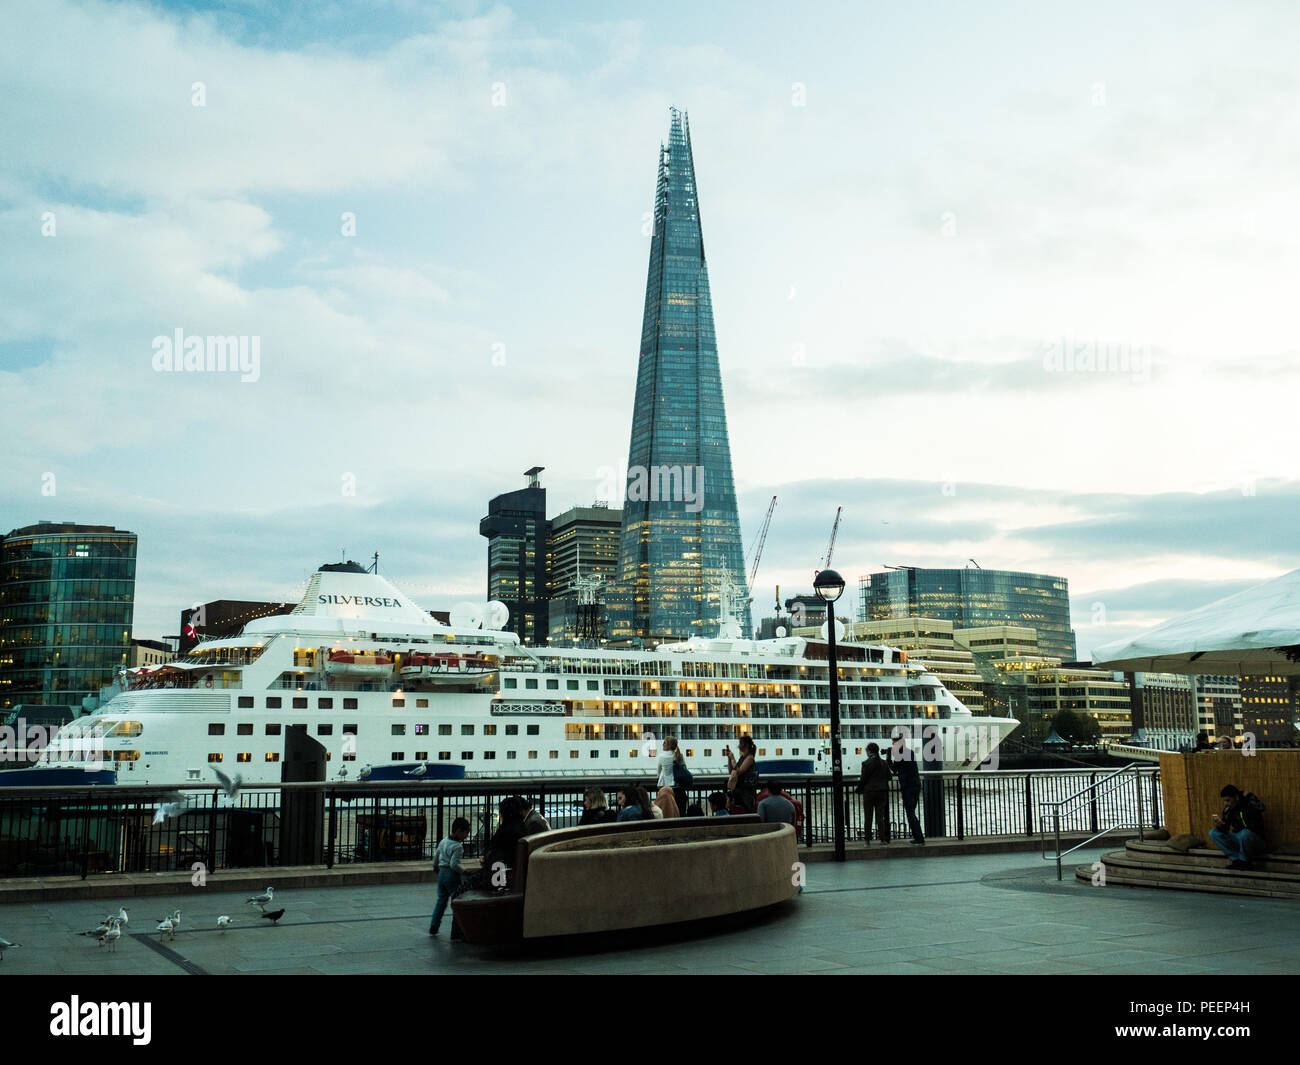 Cruise Ship on the River Thames with The Shard (of Glass) skyscraper, London. Stock Photo